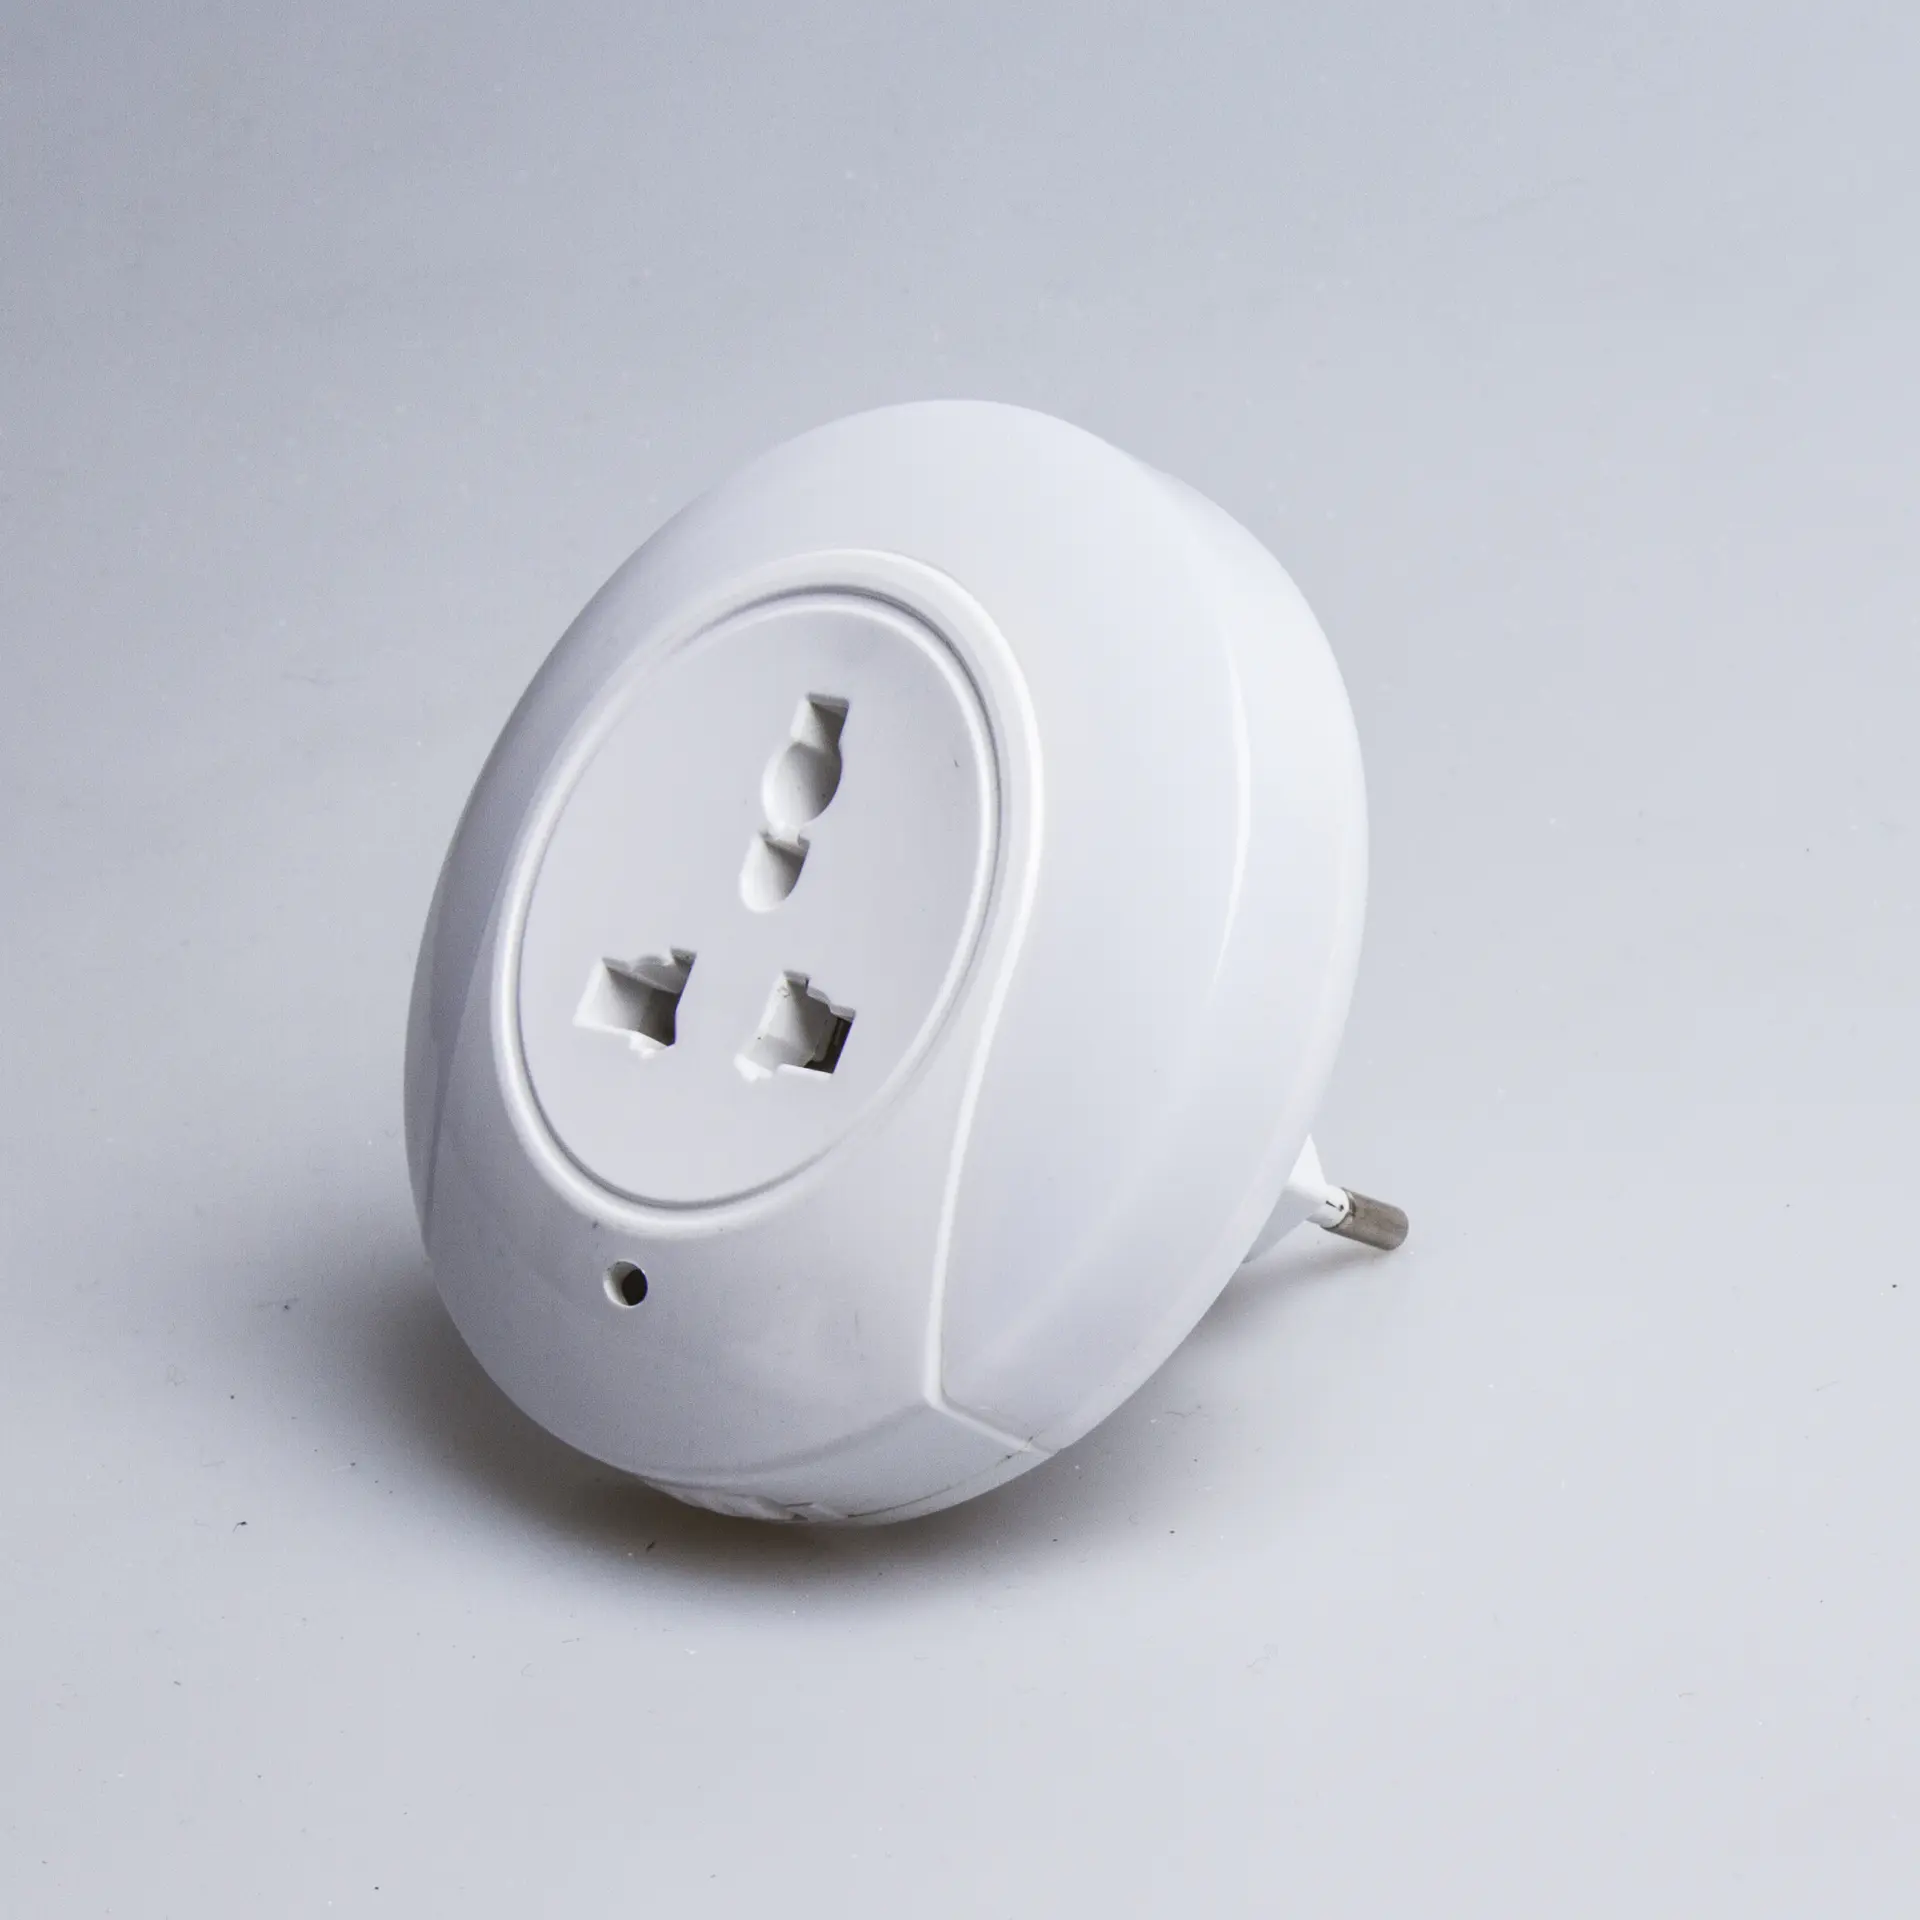 BEST SALE LED NIGHT LIGHT WITH USB CHARGER DUSK TO DAWN SENSOR PLUG INLIGHTING 5V 2A DUAL USB WALL CHARGER BEDSIDE LAMP